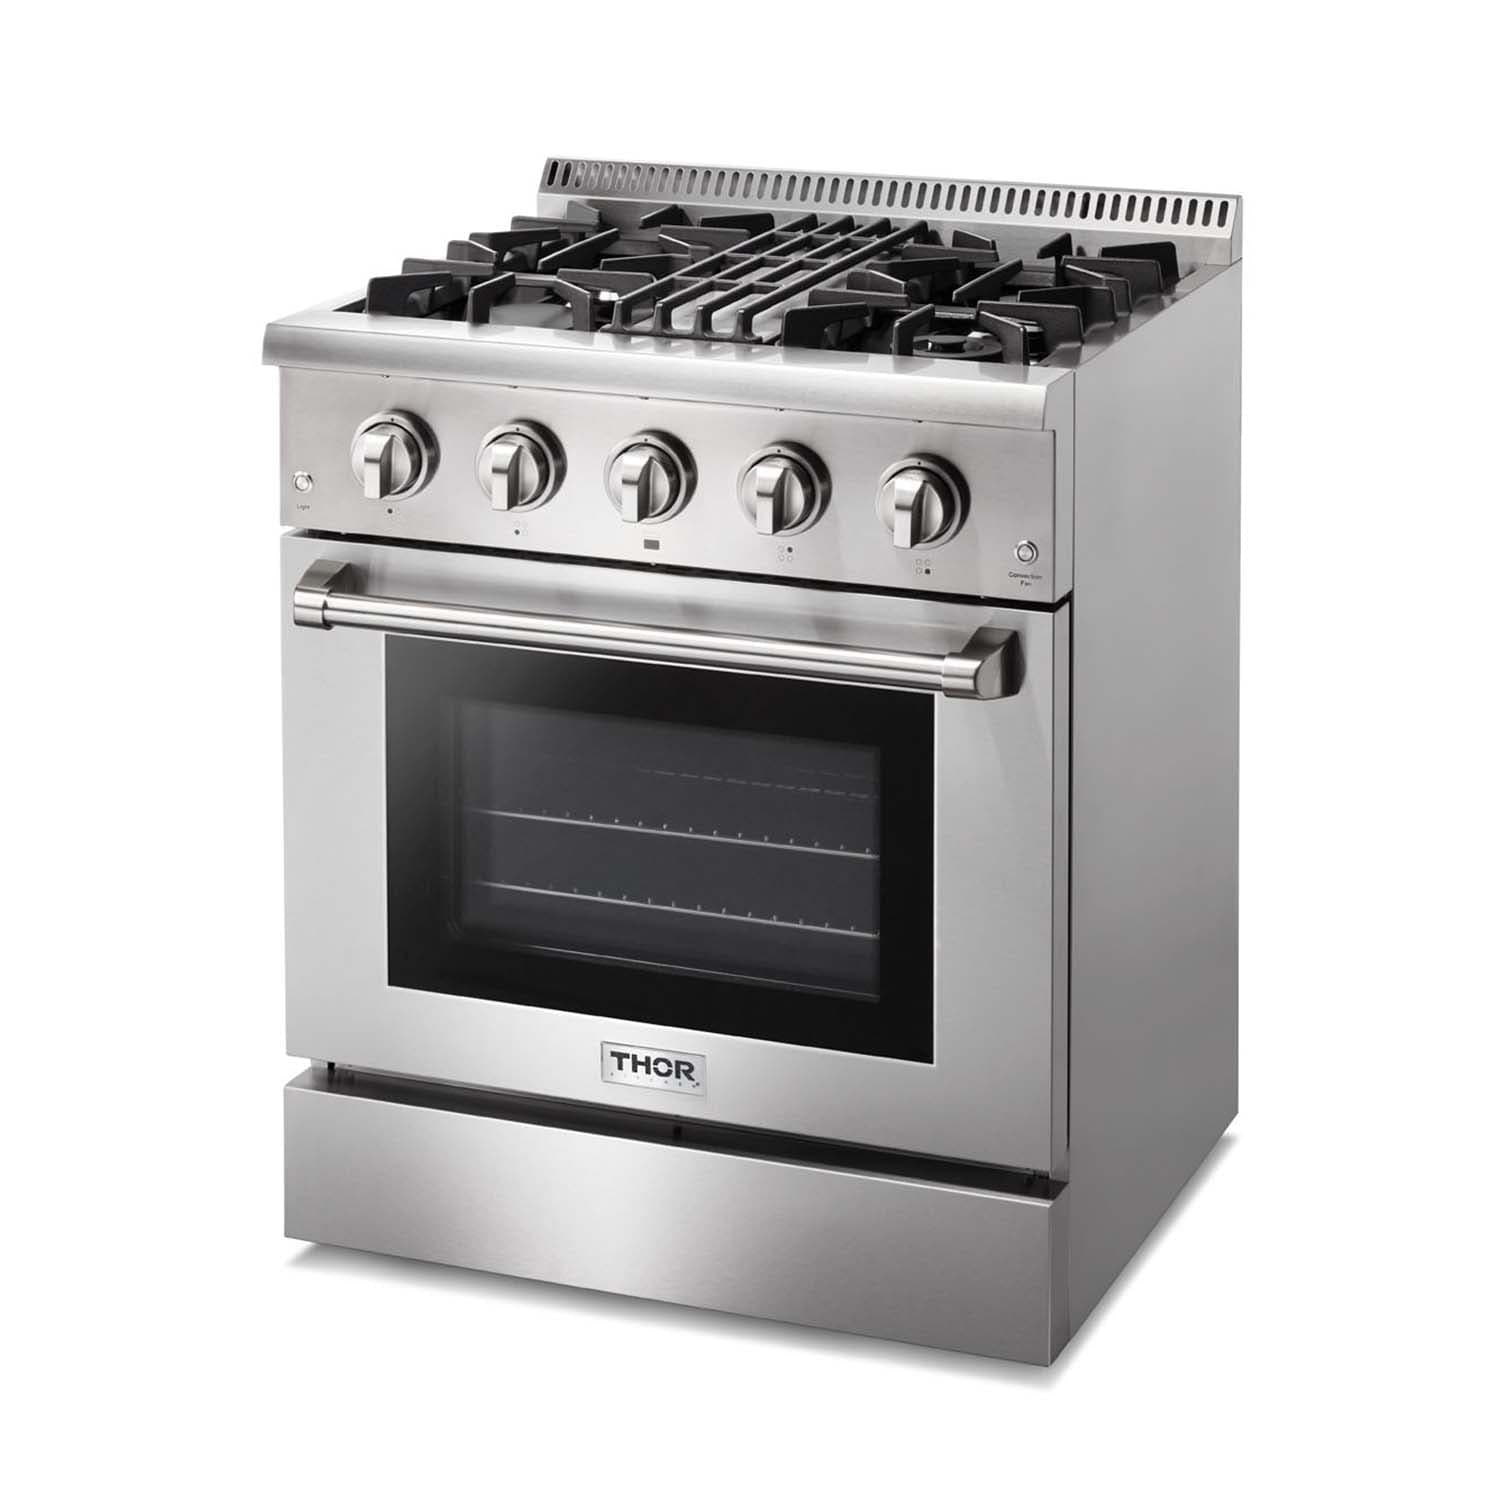 Thor Kitchen 30 in. Propane Gas Burner/Electric Oven Range in Stainless Steel HRD3088ULP Ranges HRD3088ULP Luxury Appliances Direct